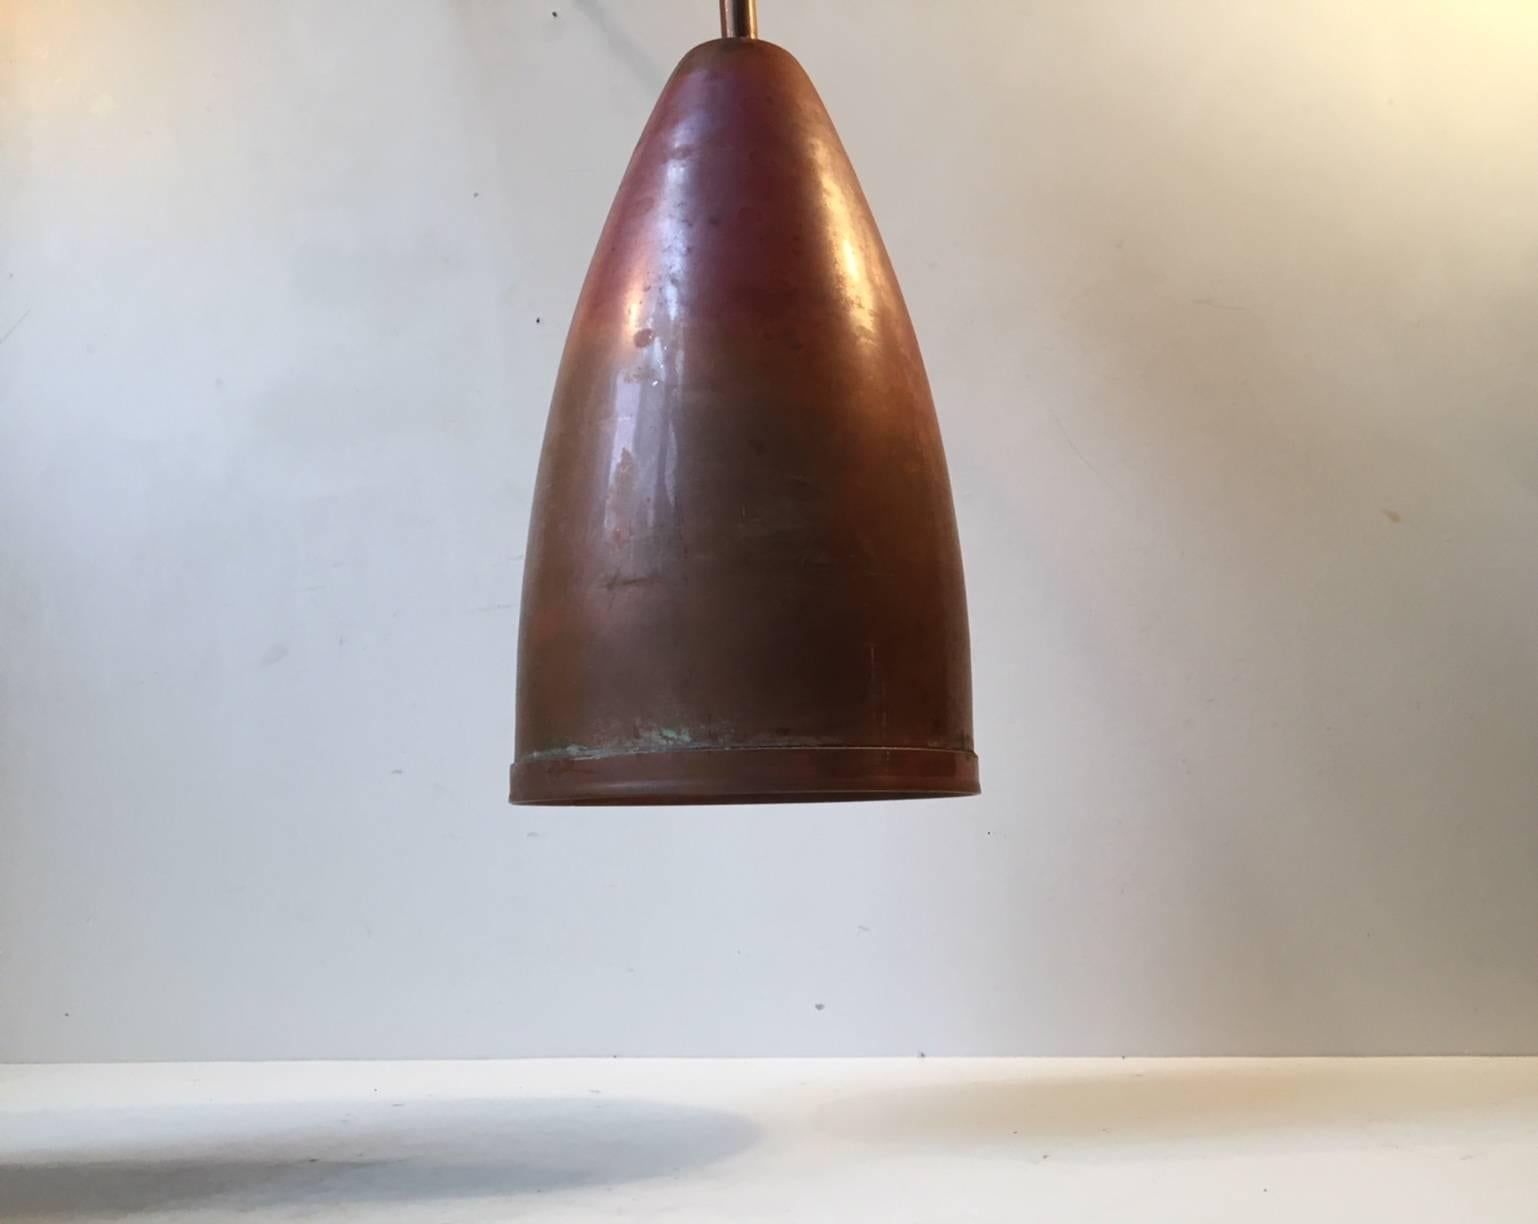 A Pair of Bullet shaped solid copper pendant lamps with matching red patina. Manufactured by Kobberkompagniet in Denmark during the 1960s.